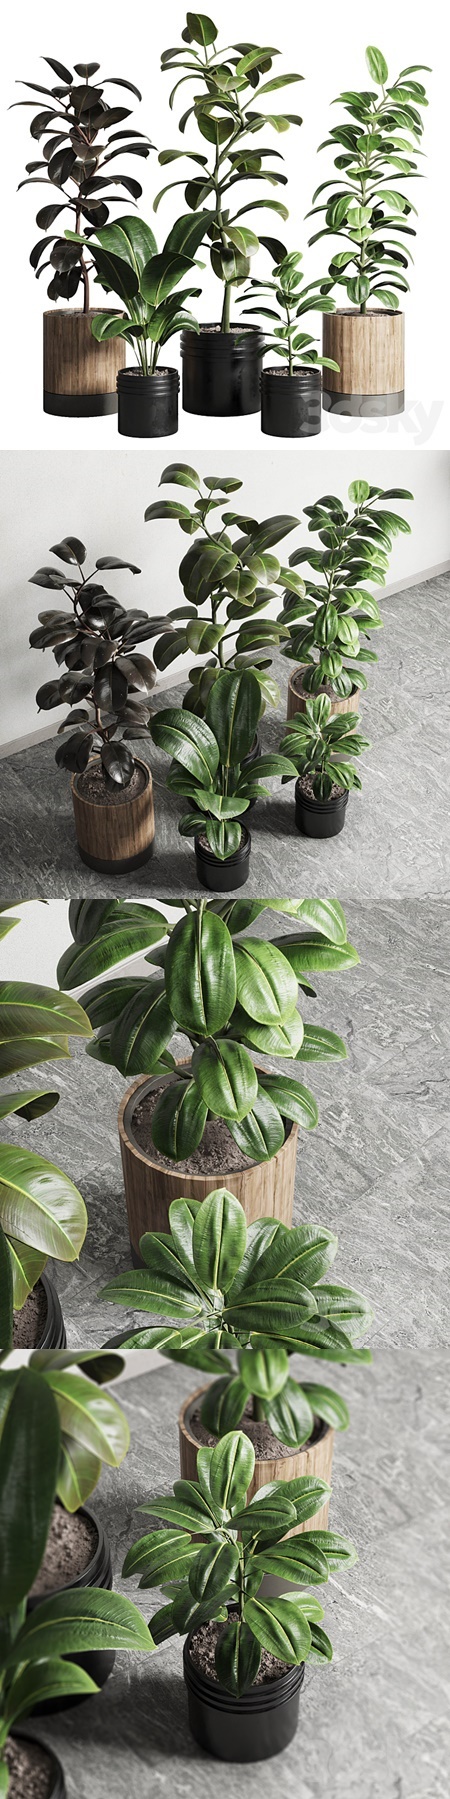 Ficus - Ficus rubbery plant 165 dirty wooden and plastic pots